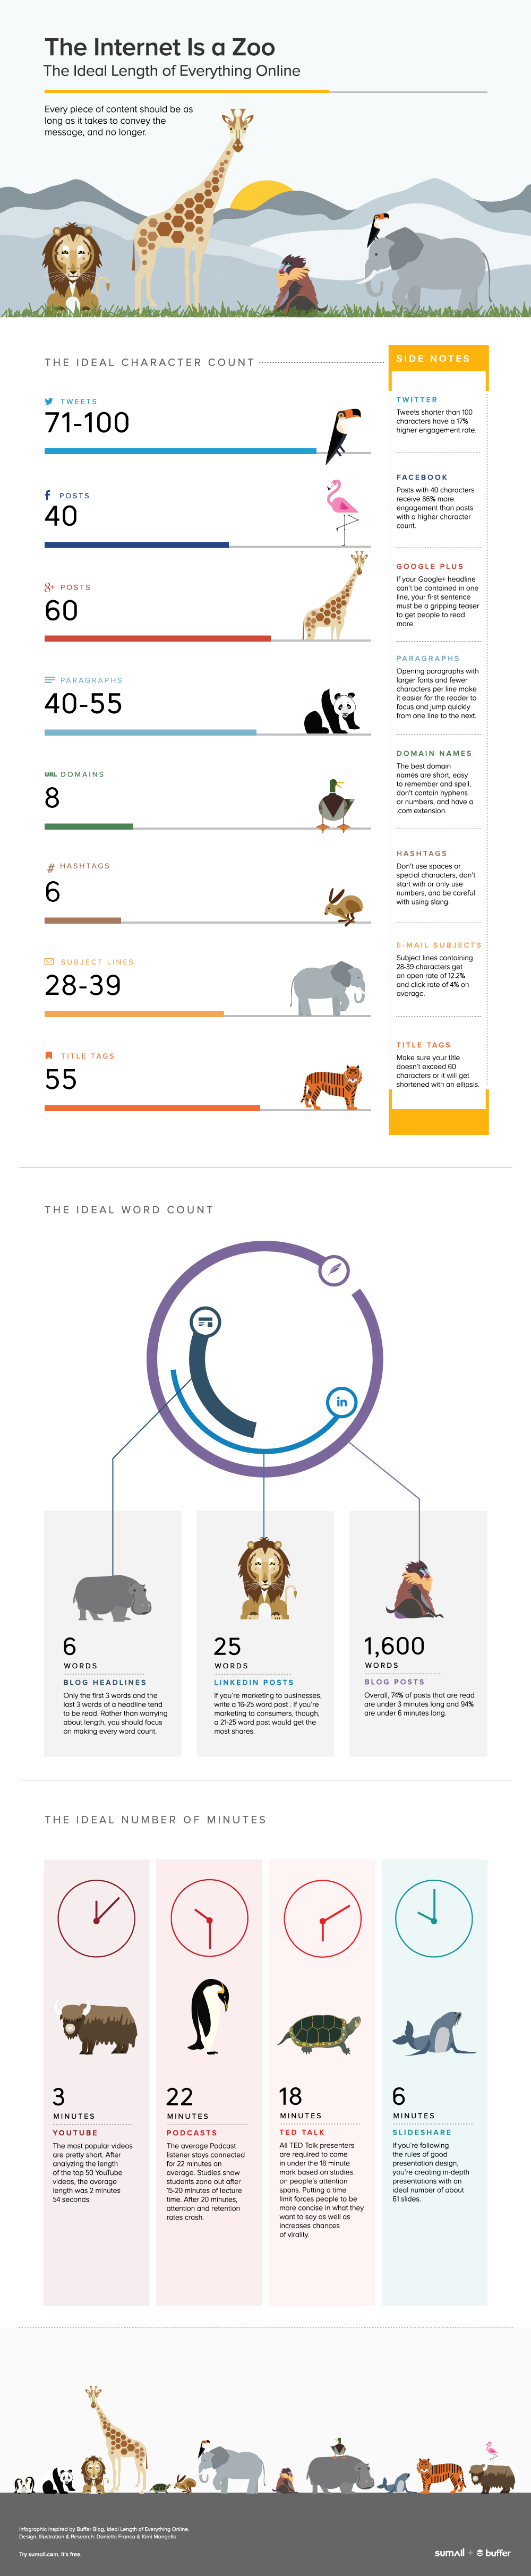 Length Matters in Social Media (Infographic) - Future Expat